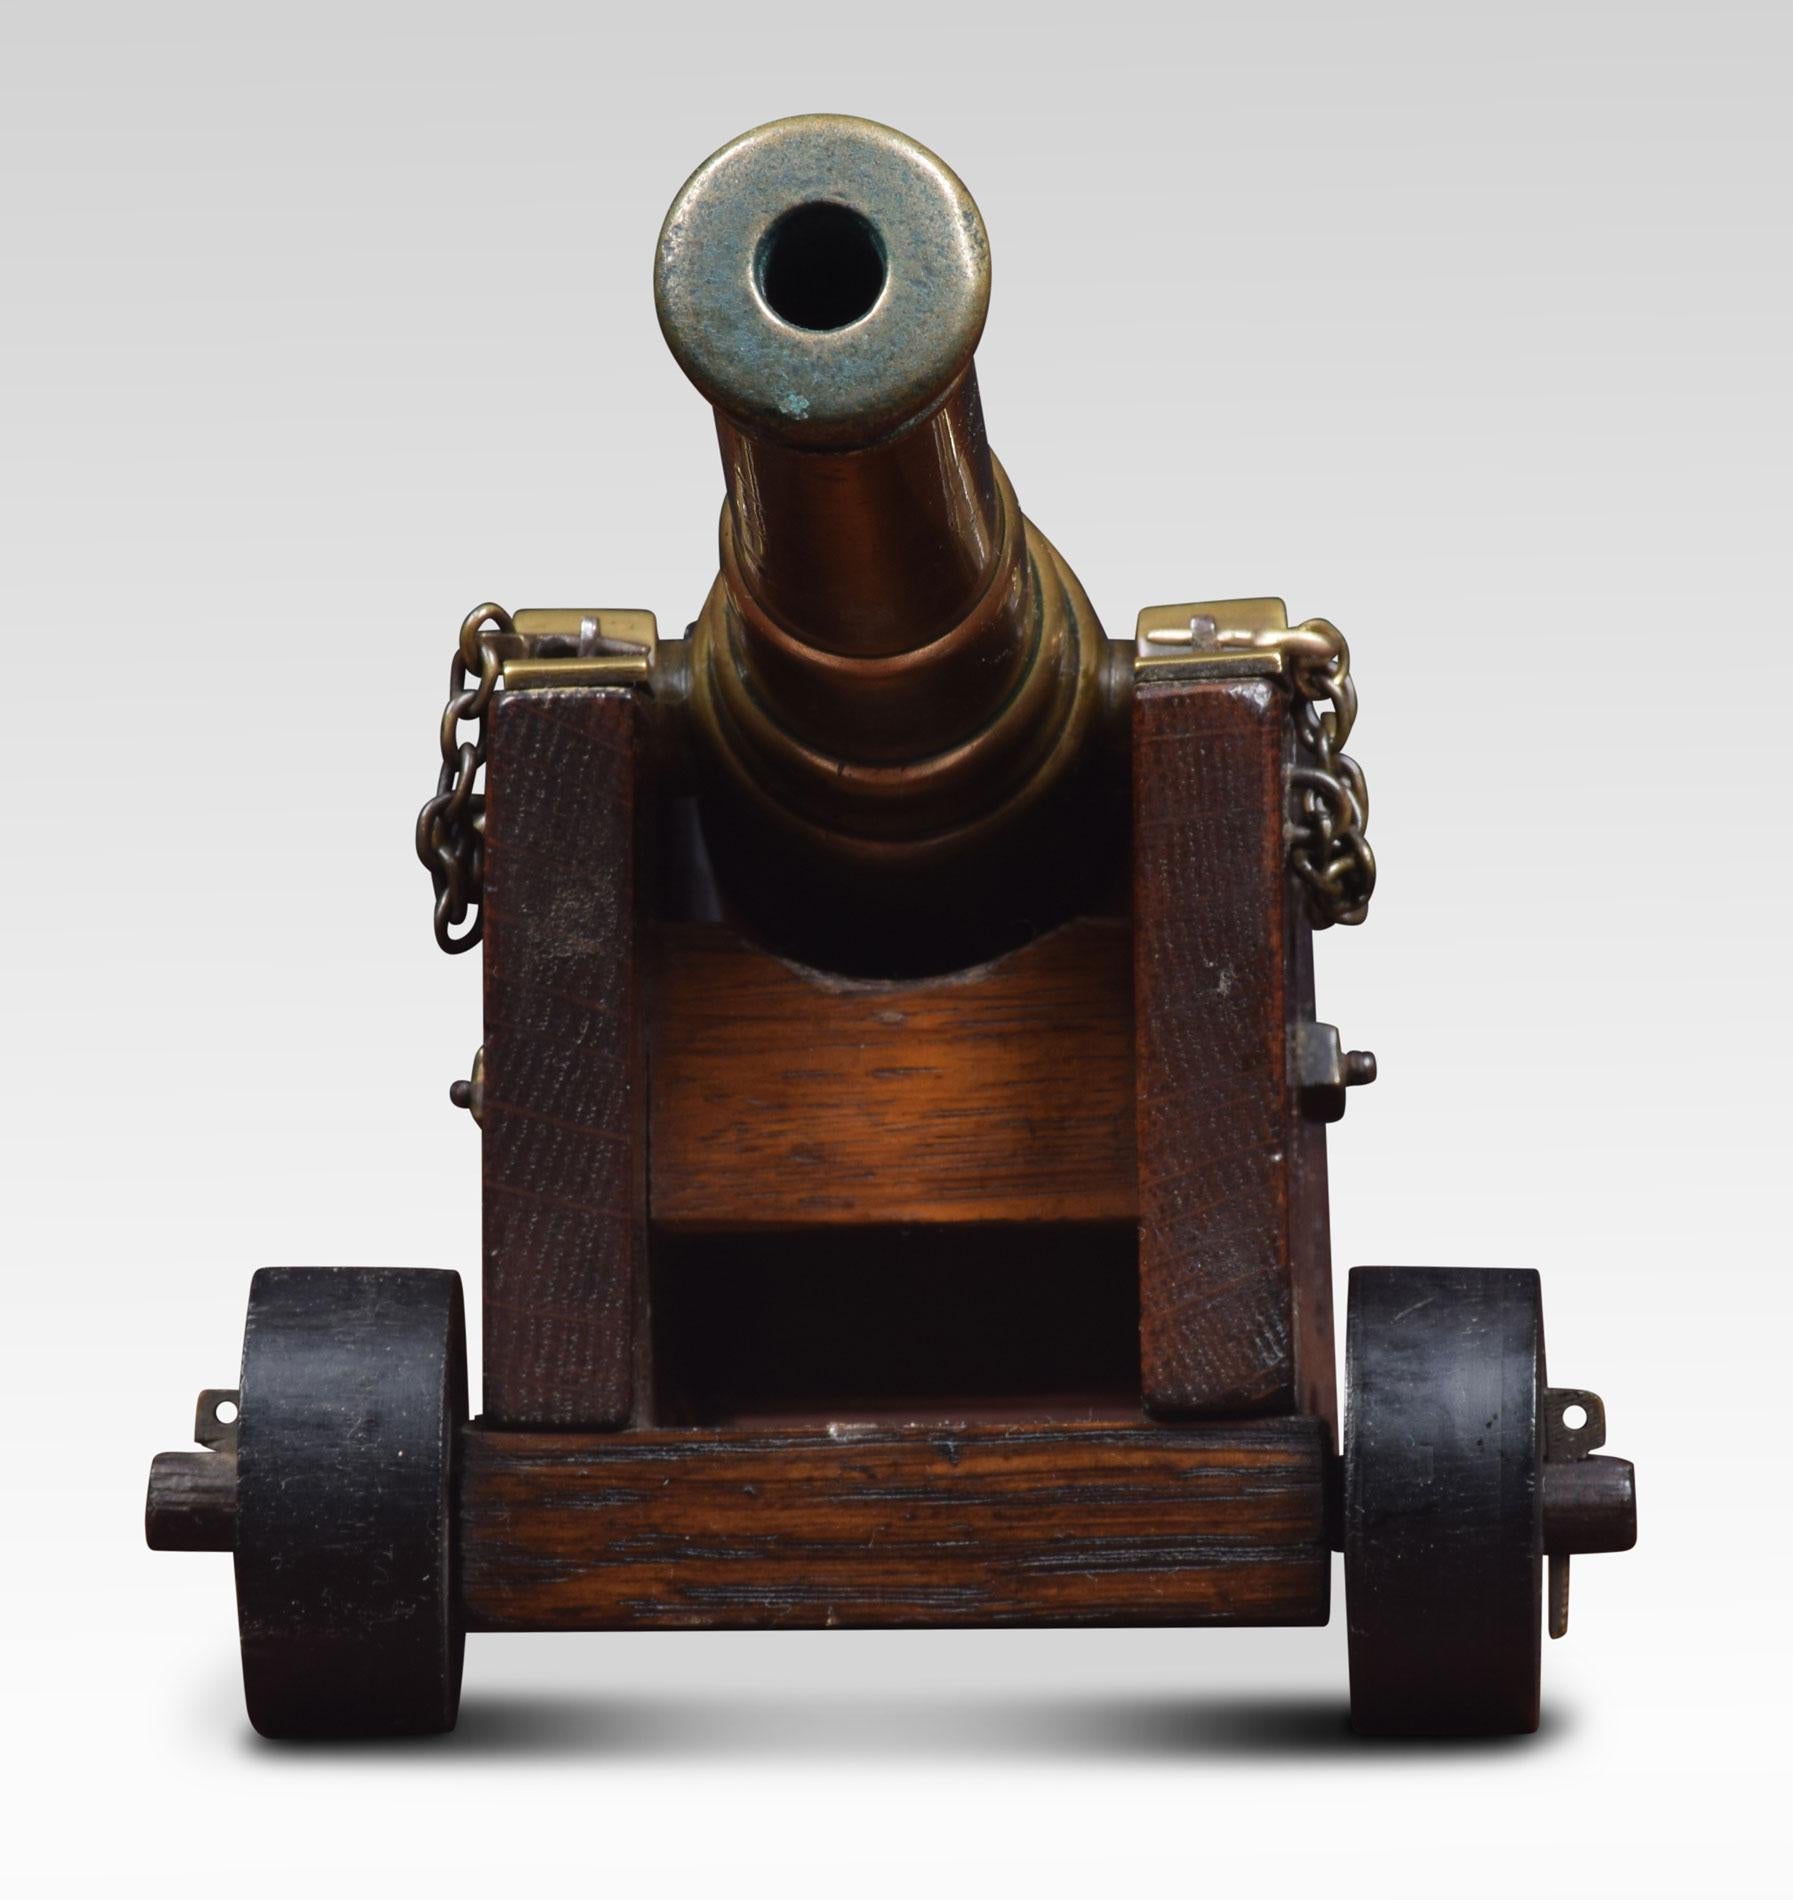 Brass desktop model of a signal cannon having 7.5 Inches barrel on oak carriage.
Dimensions
Height 5 inches
Width 8.5 inches
Depth 4.5 inches.